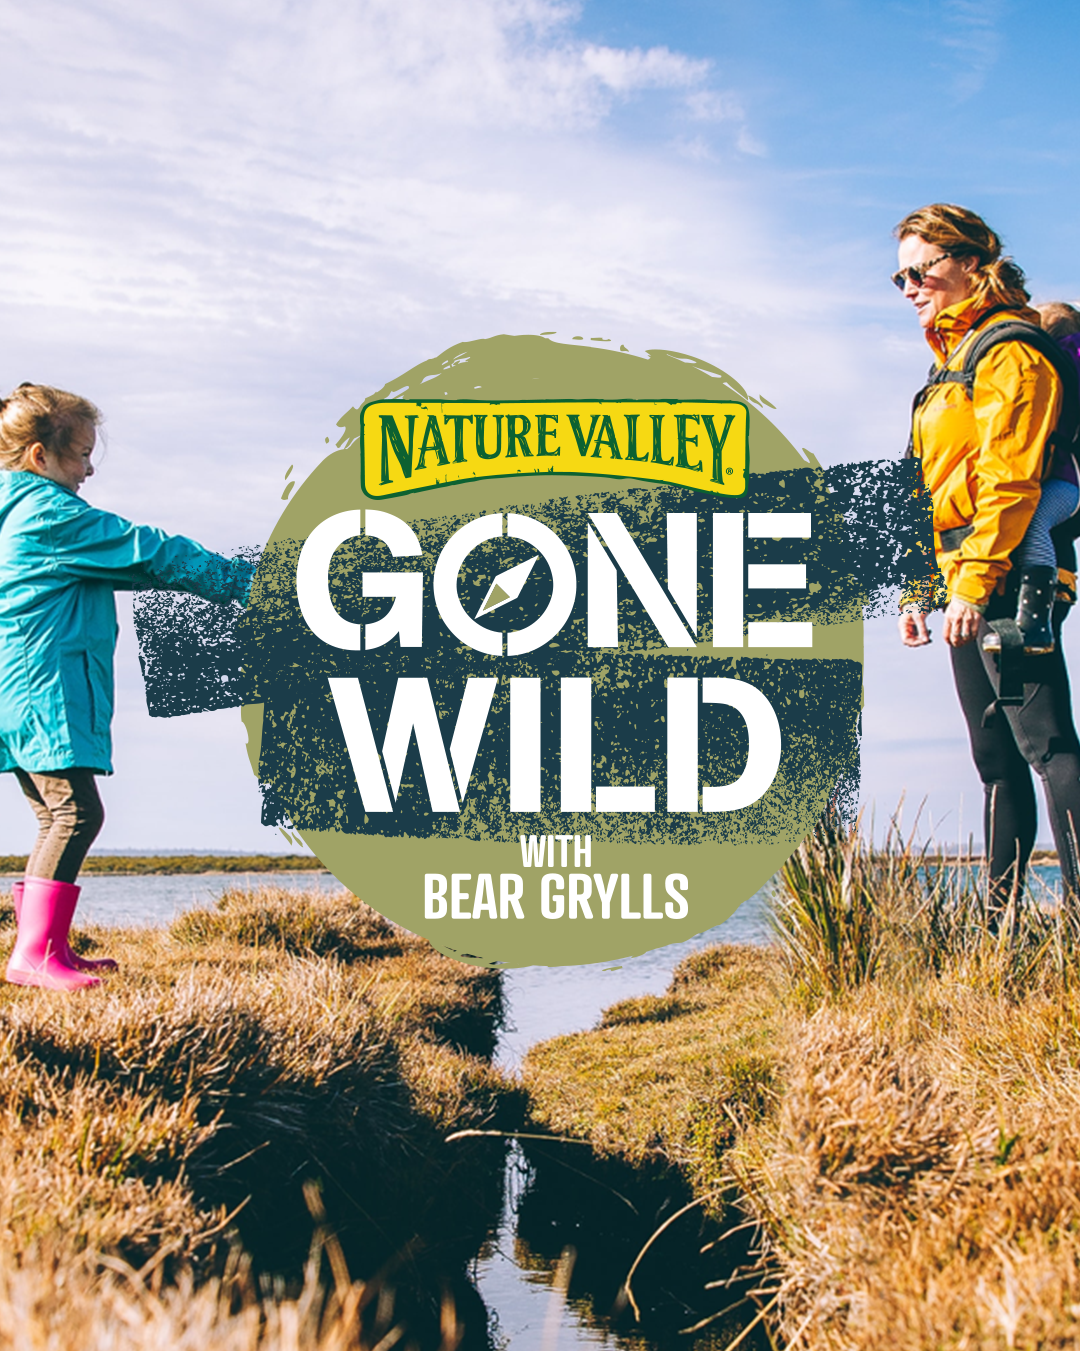 Nature Valley inks festival deal with Bear Grylls